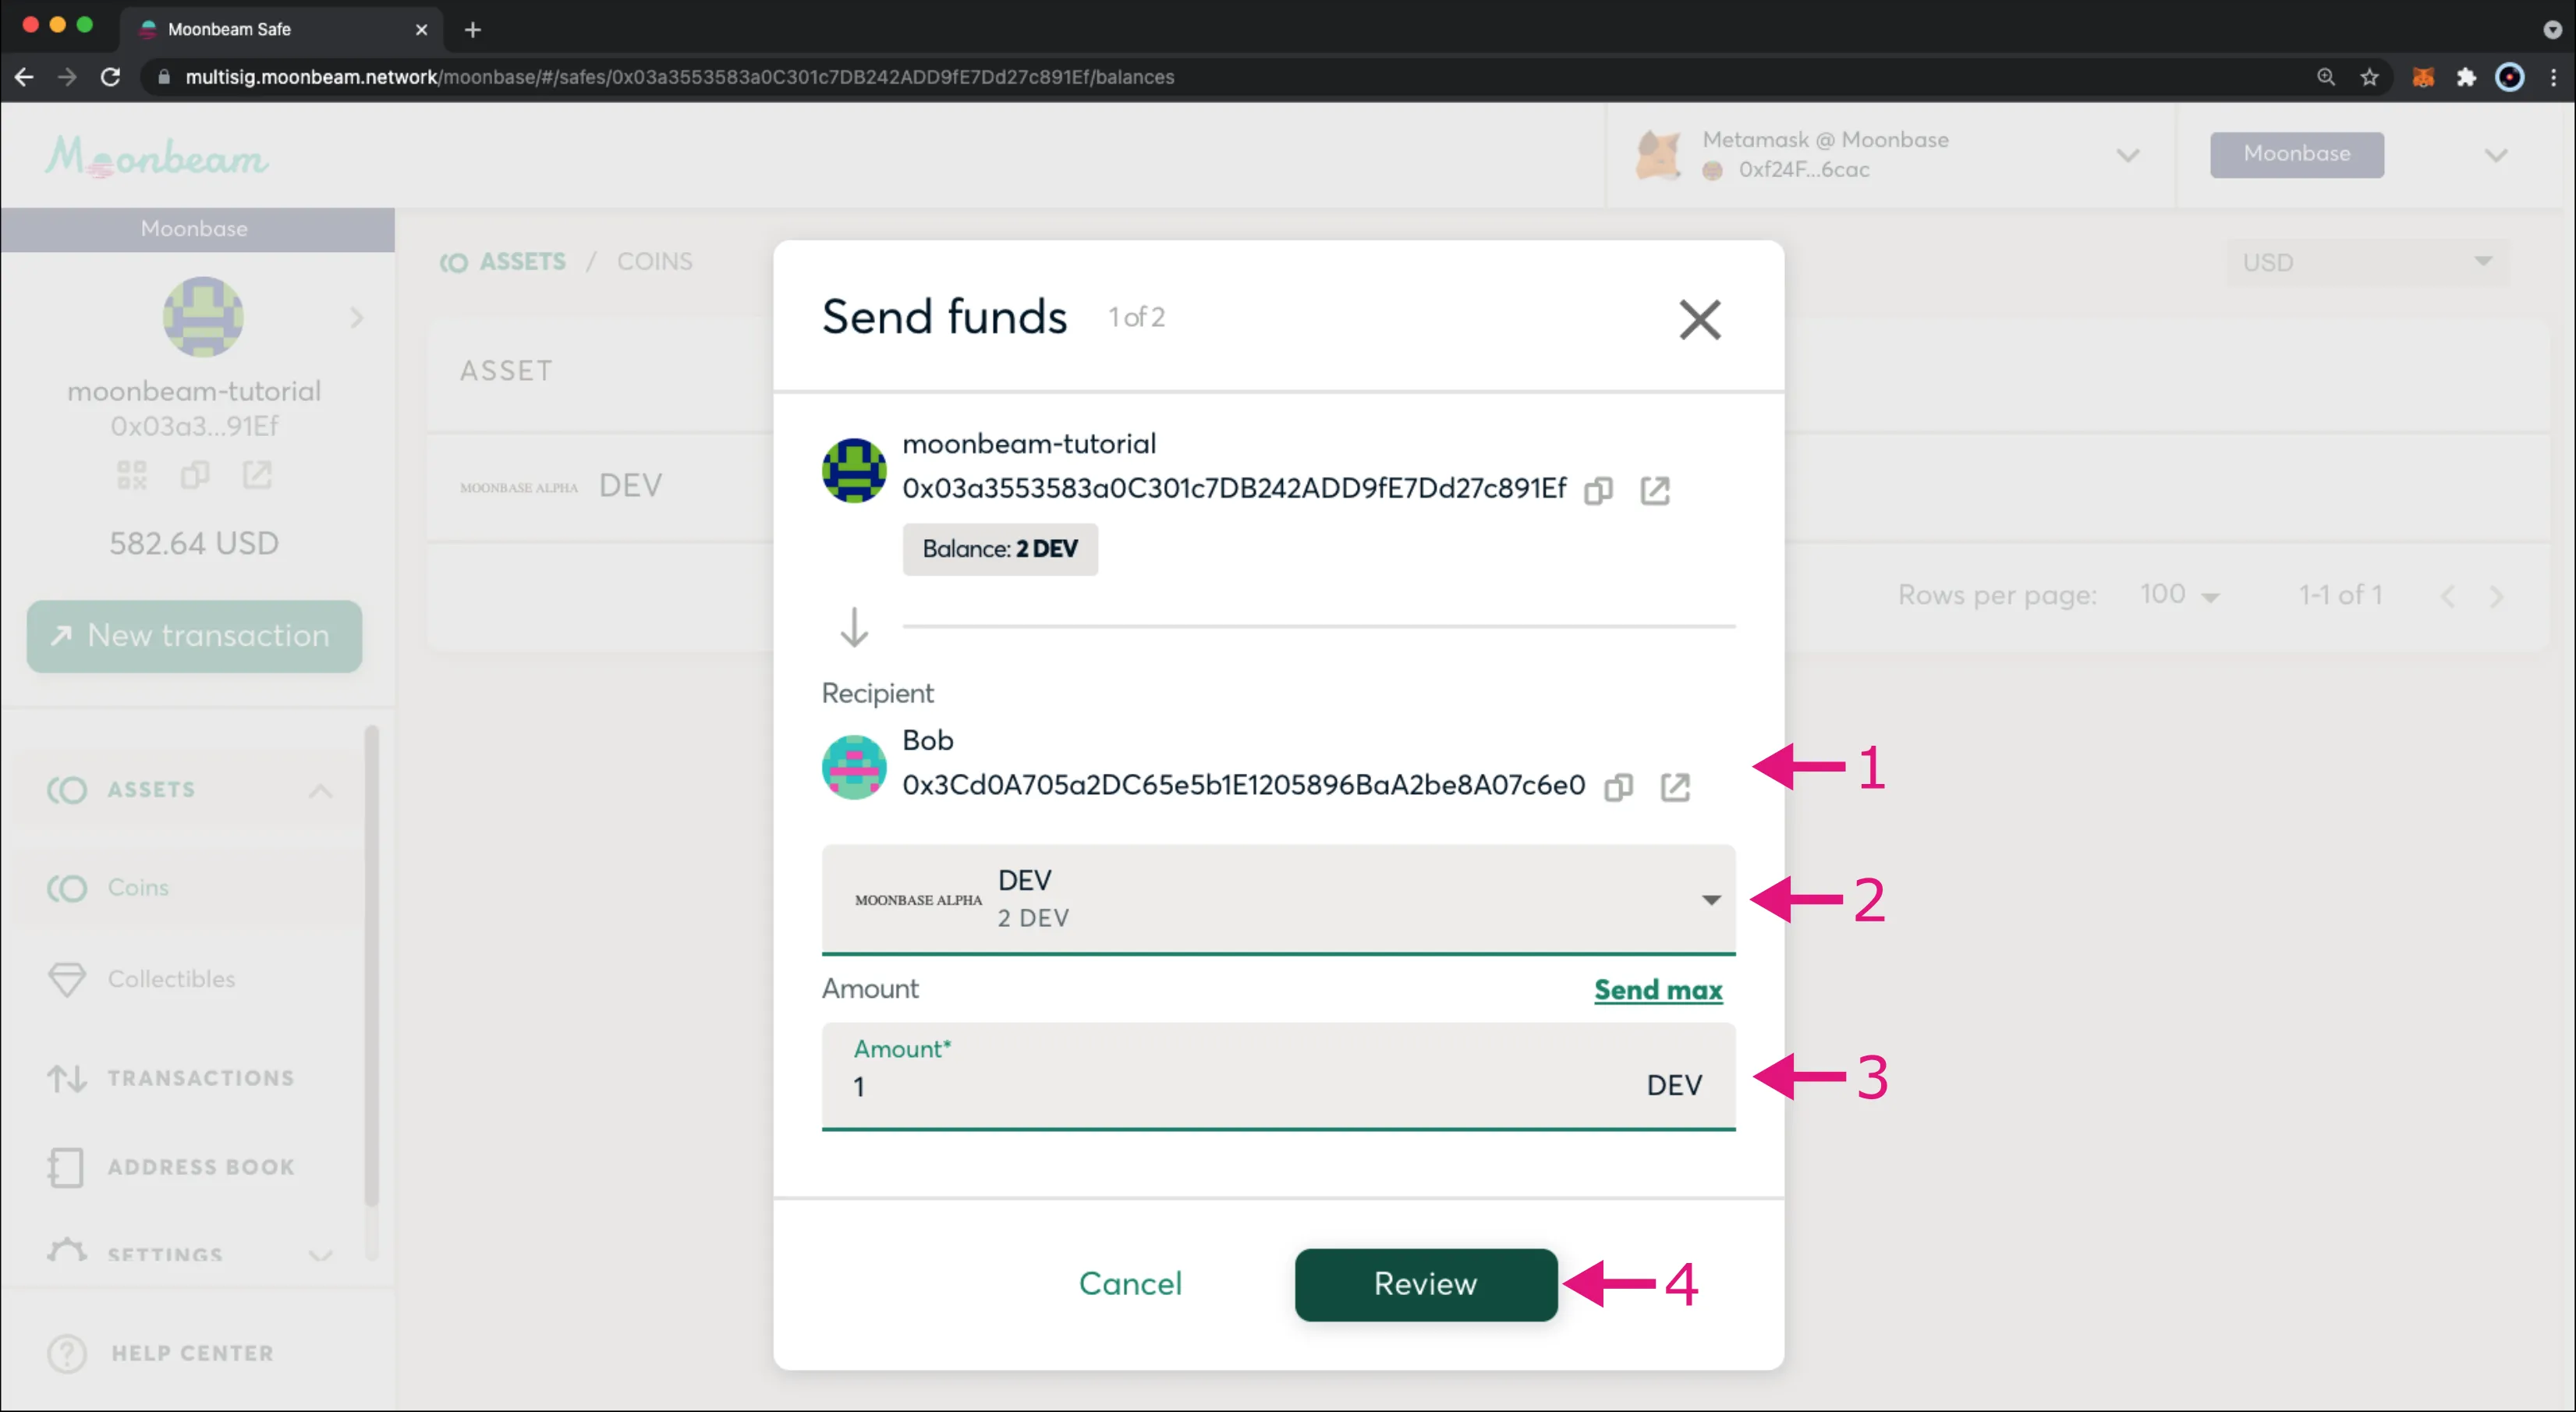 Send 1 DEV Token from the Safe to Bob